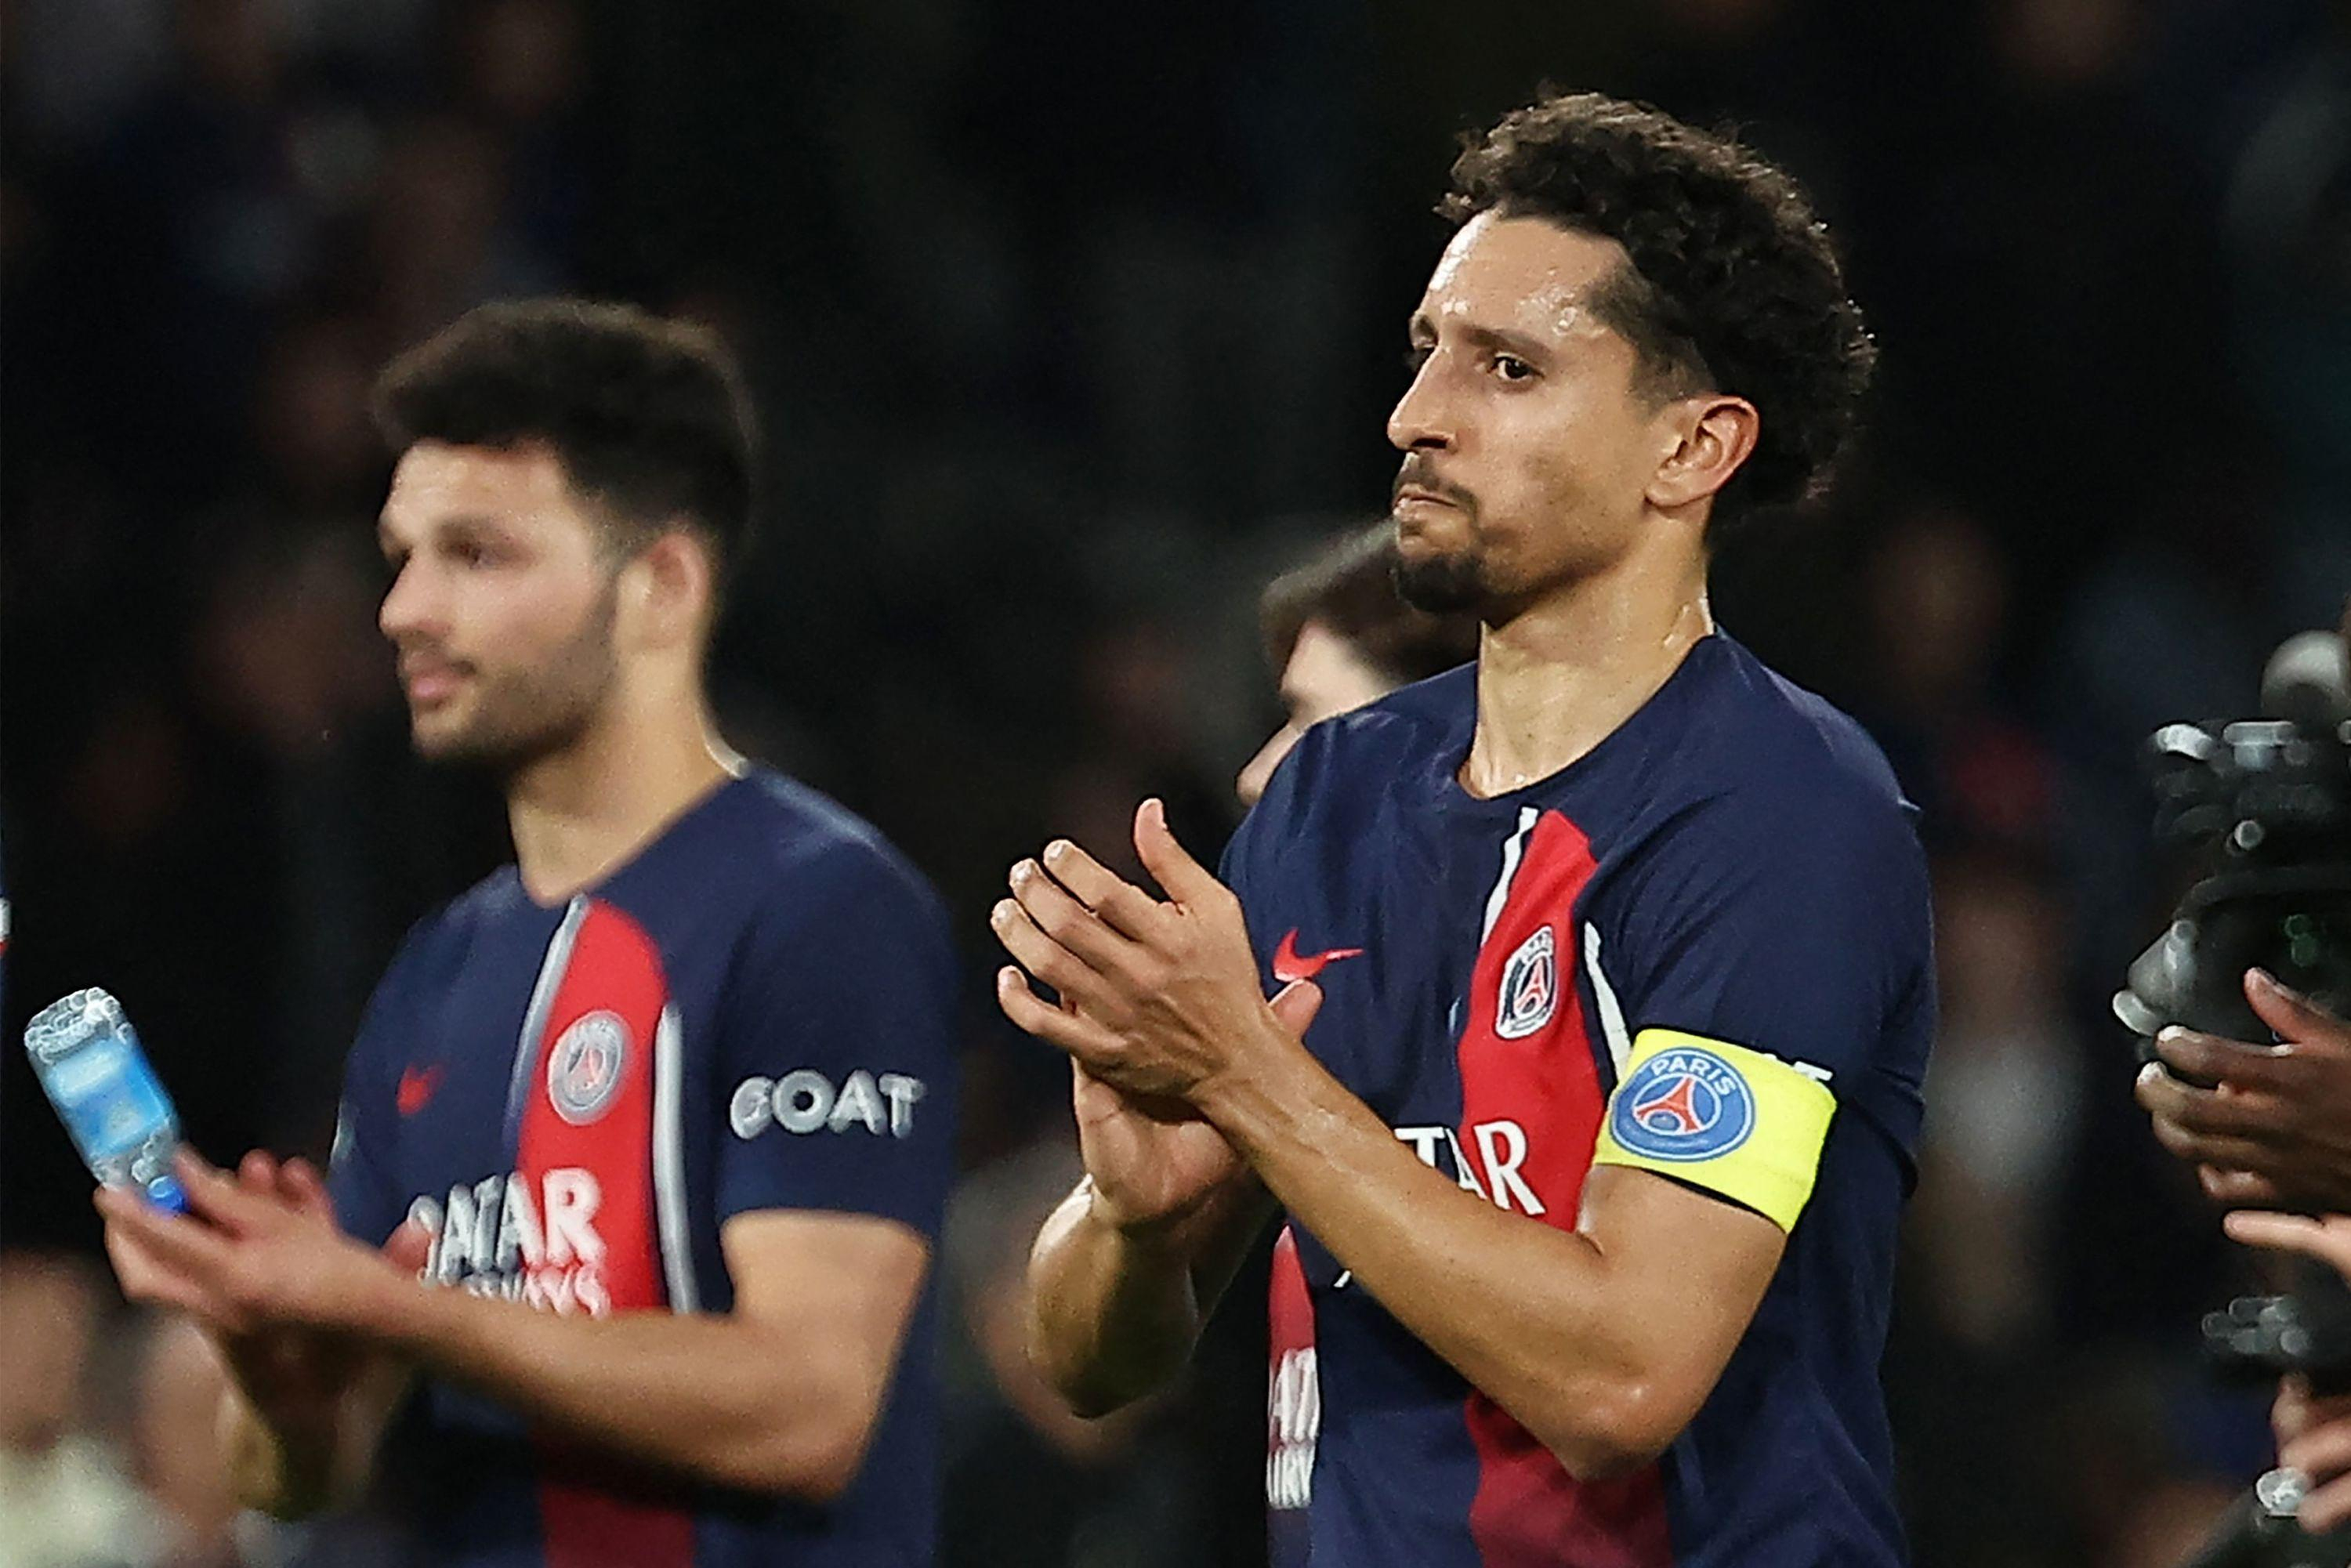 PSG: “I would be very happy to spend my entire career here,” says Marquinhos